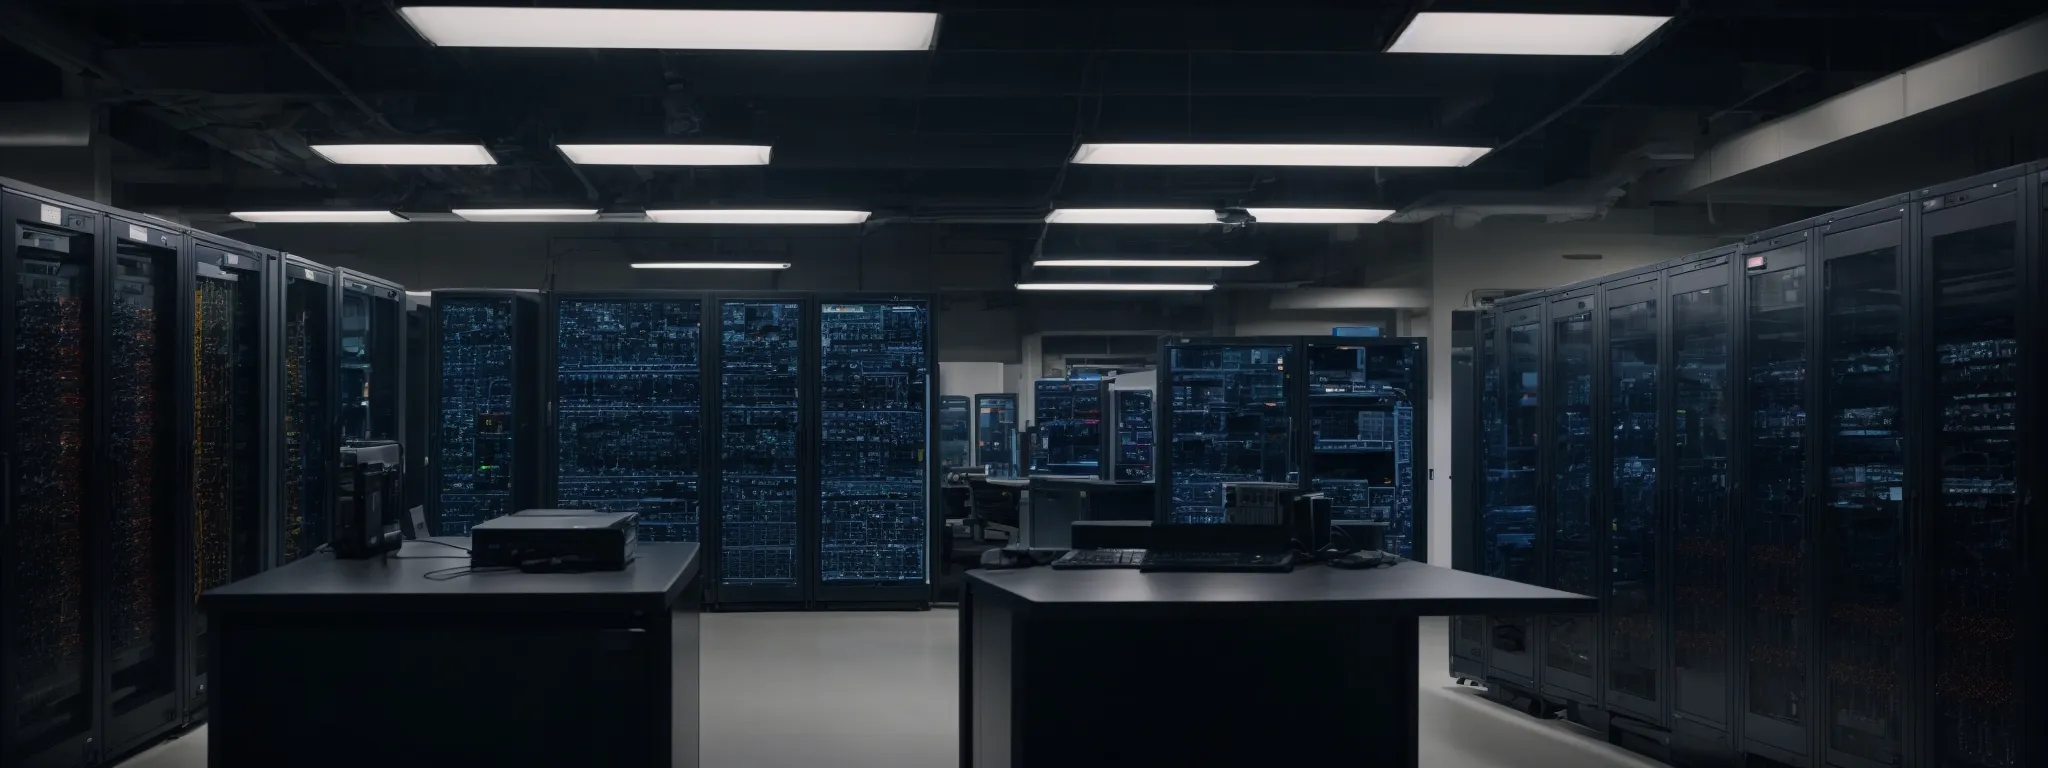 a server room with a network of computers indicating advanced technology infrastructure.